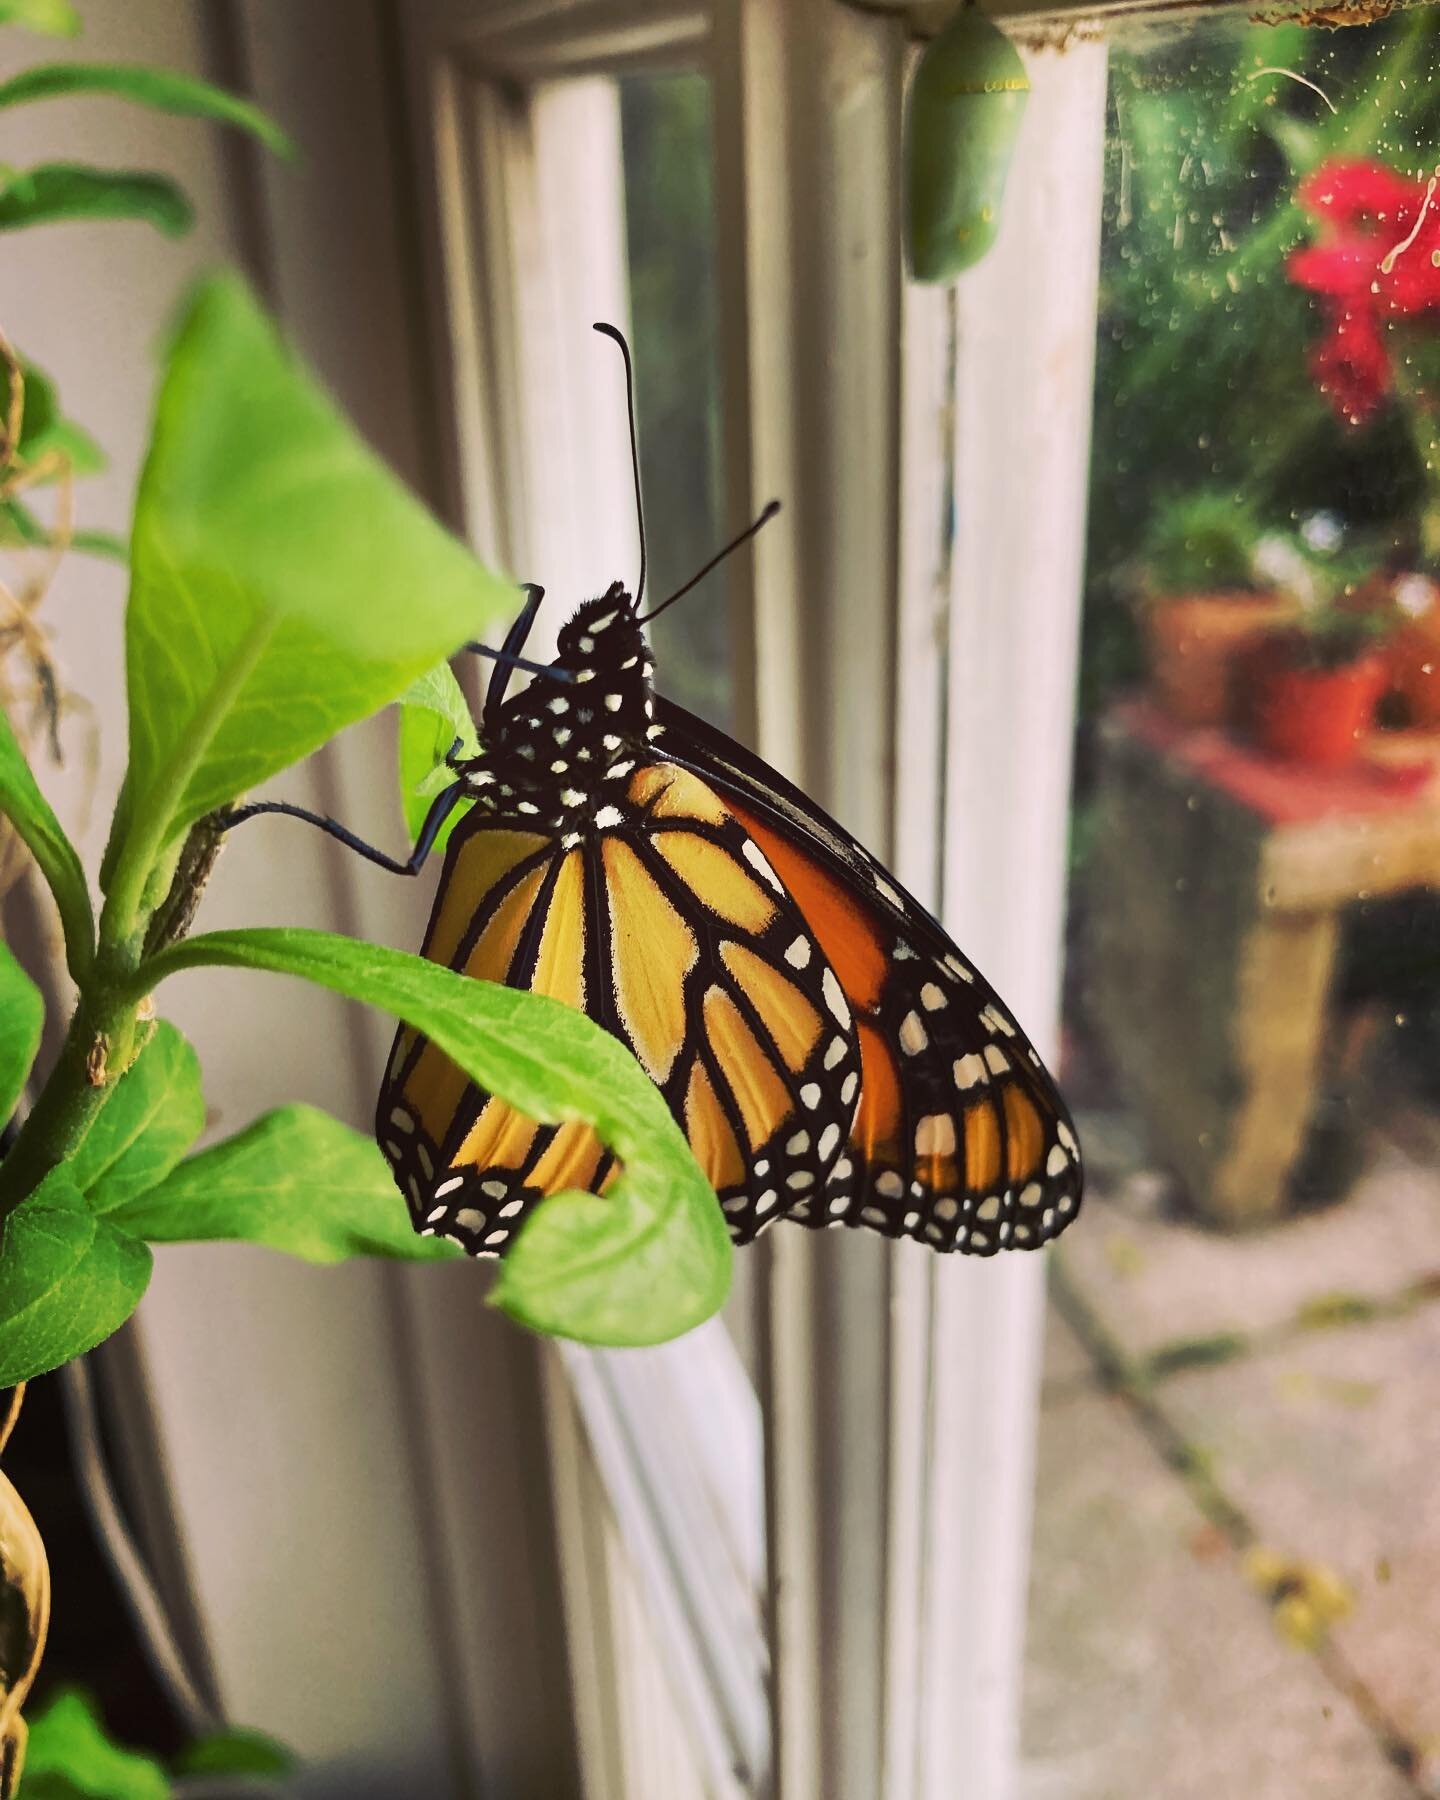 just down here growing monarch butterflies, as one does